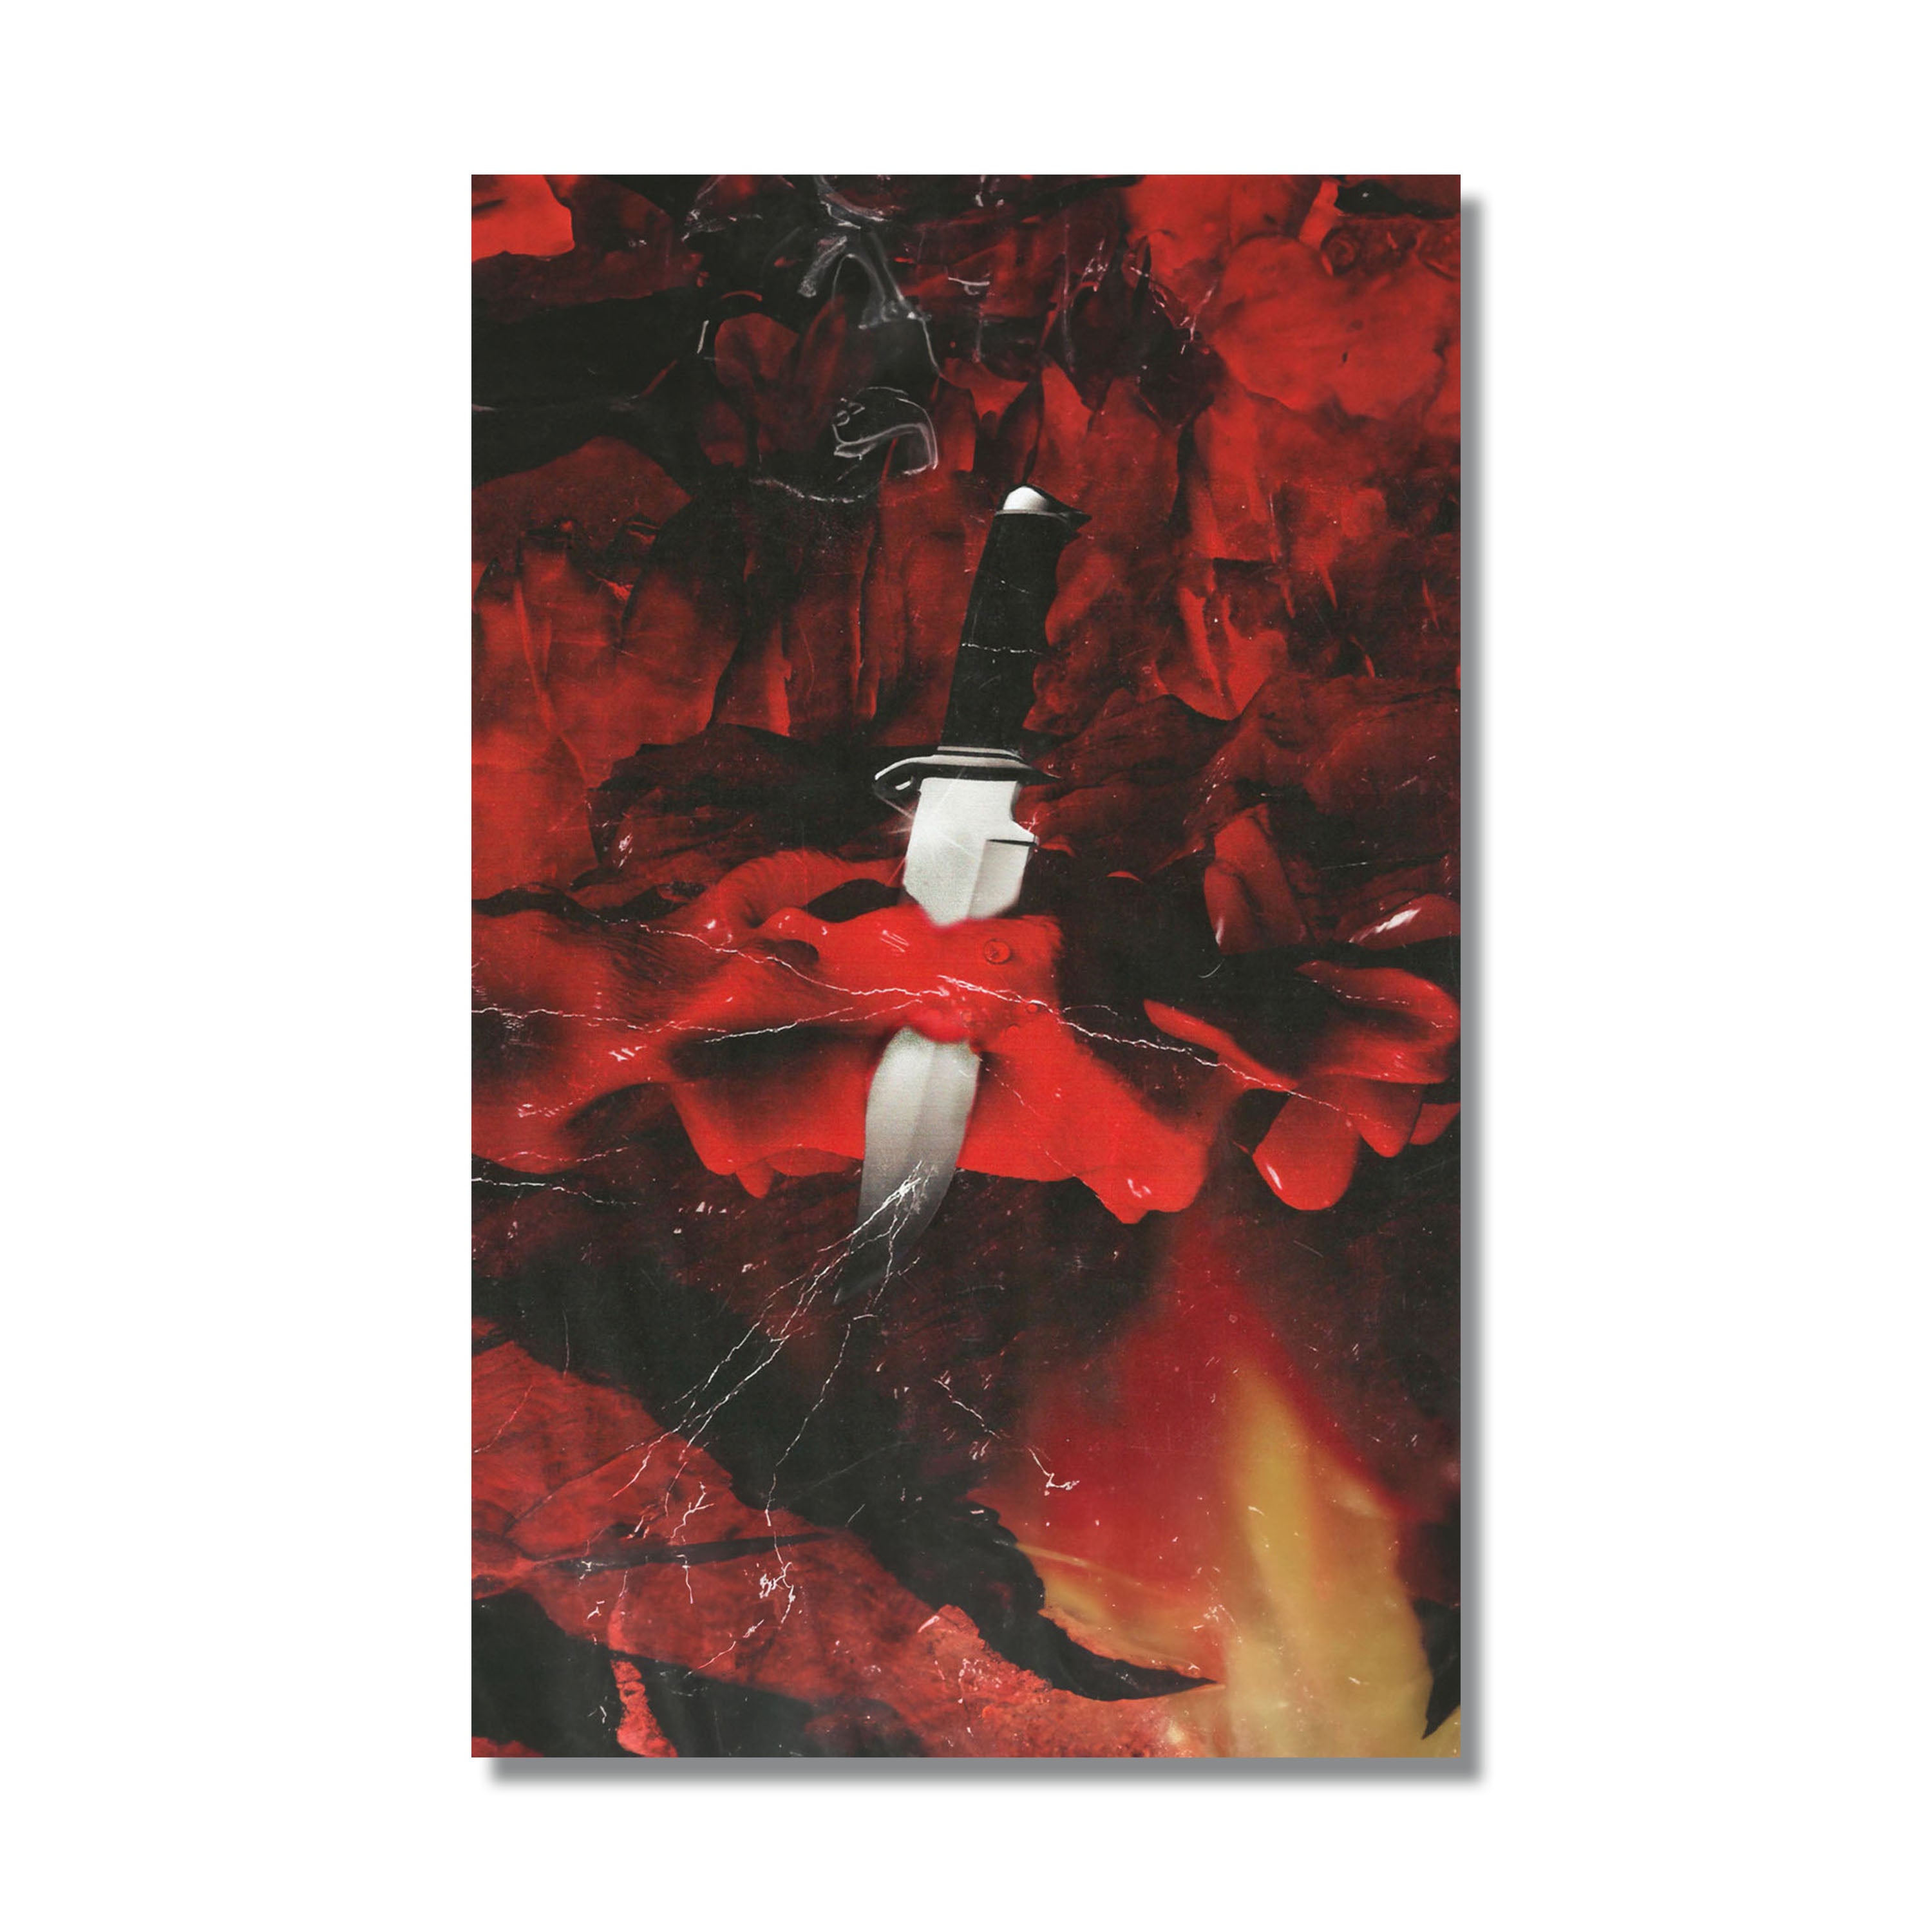 21 Savage Poster (Album Extended Cover)